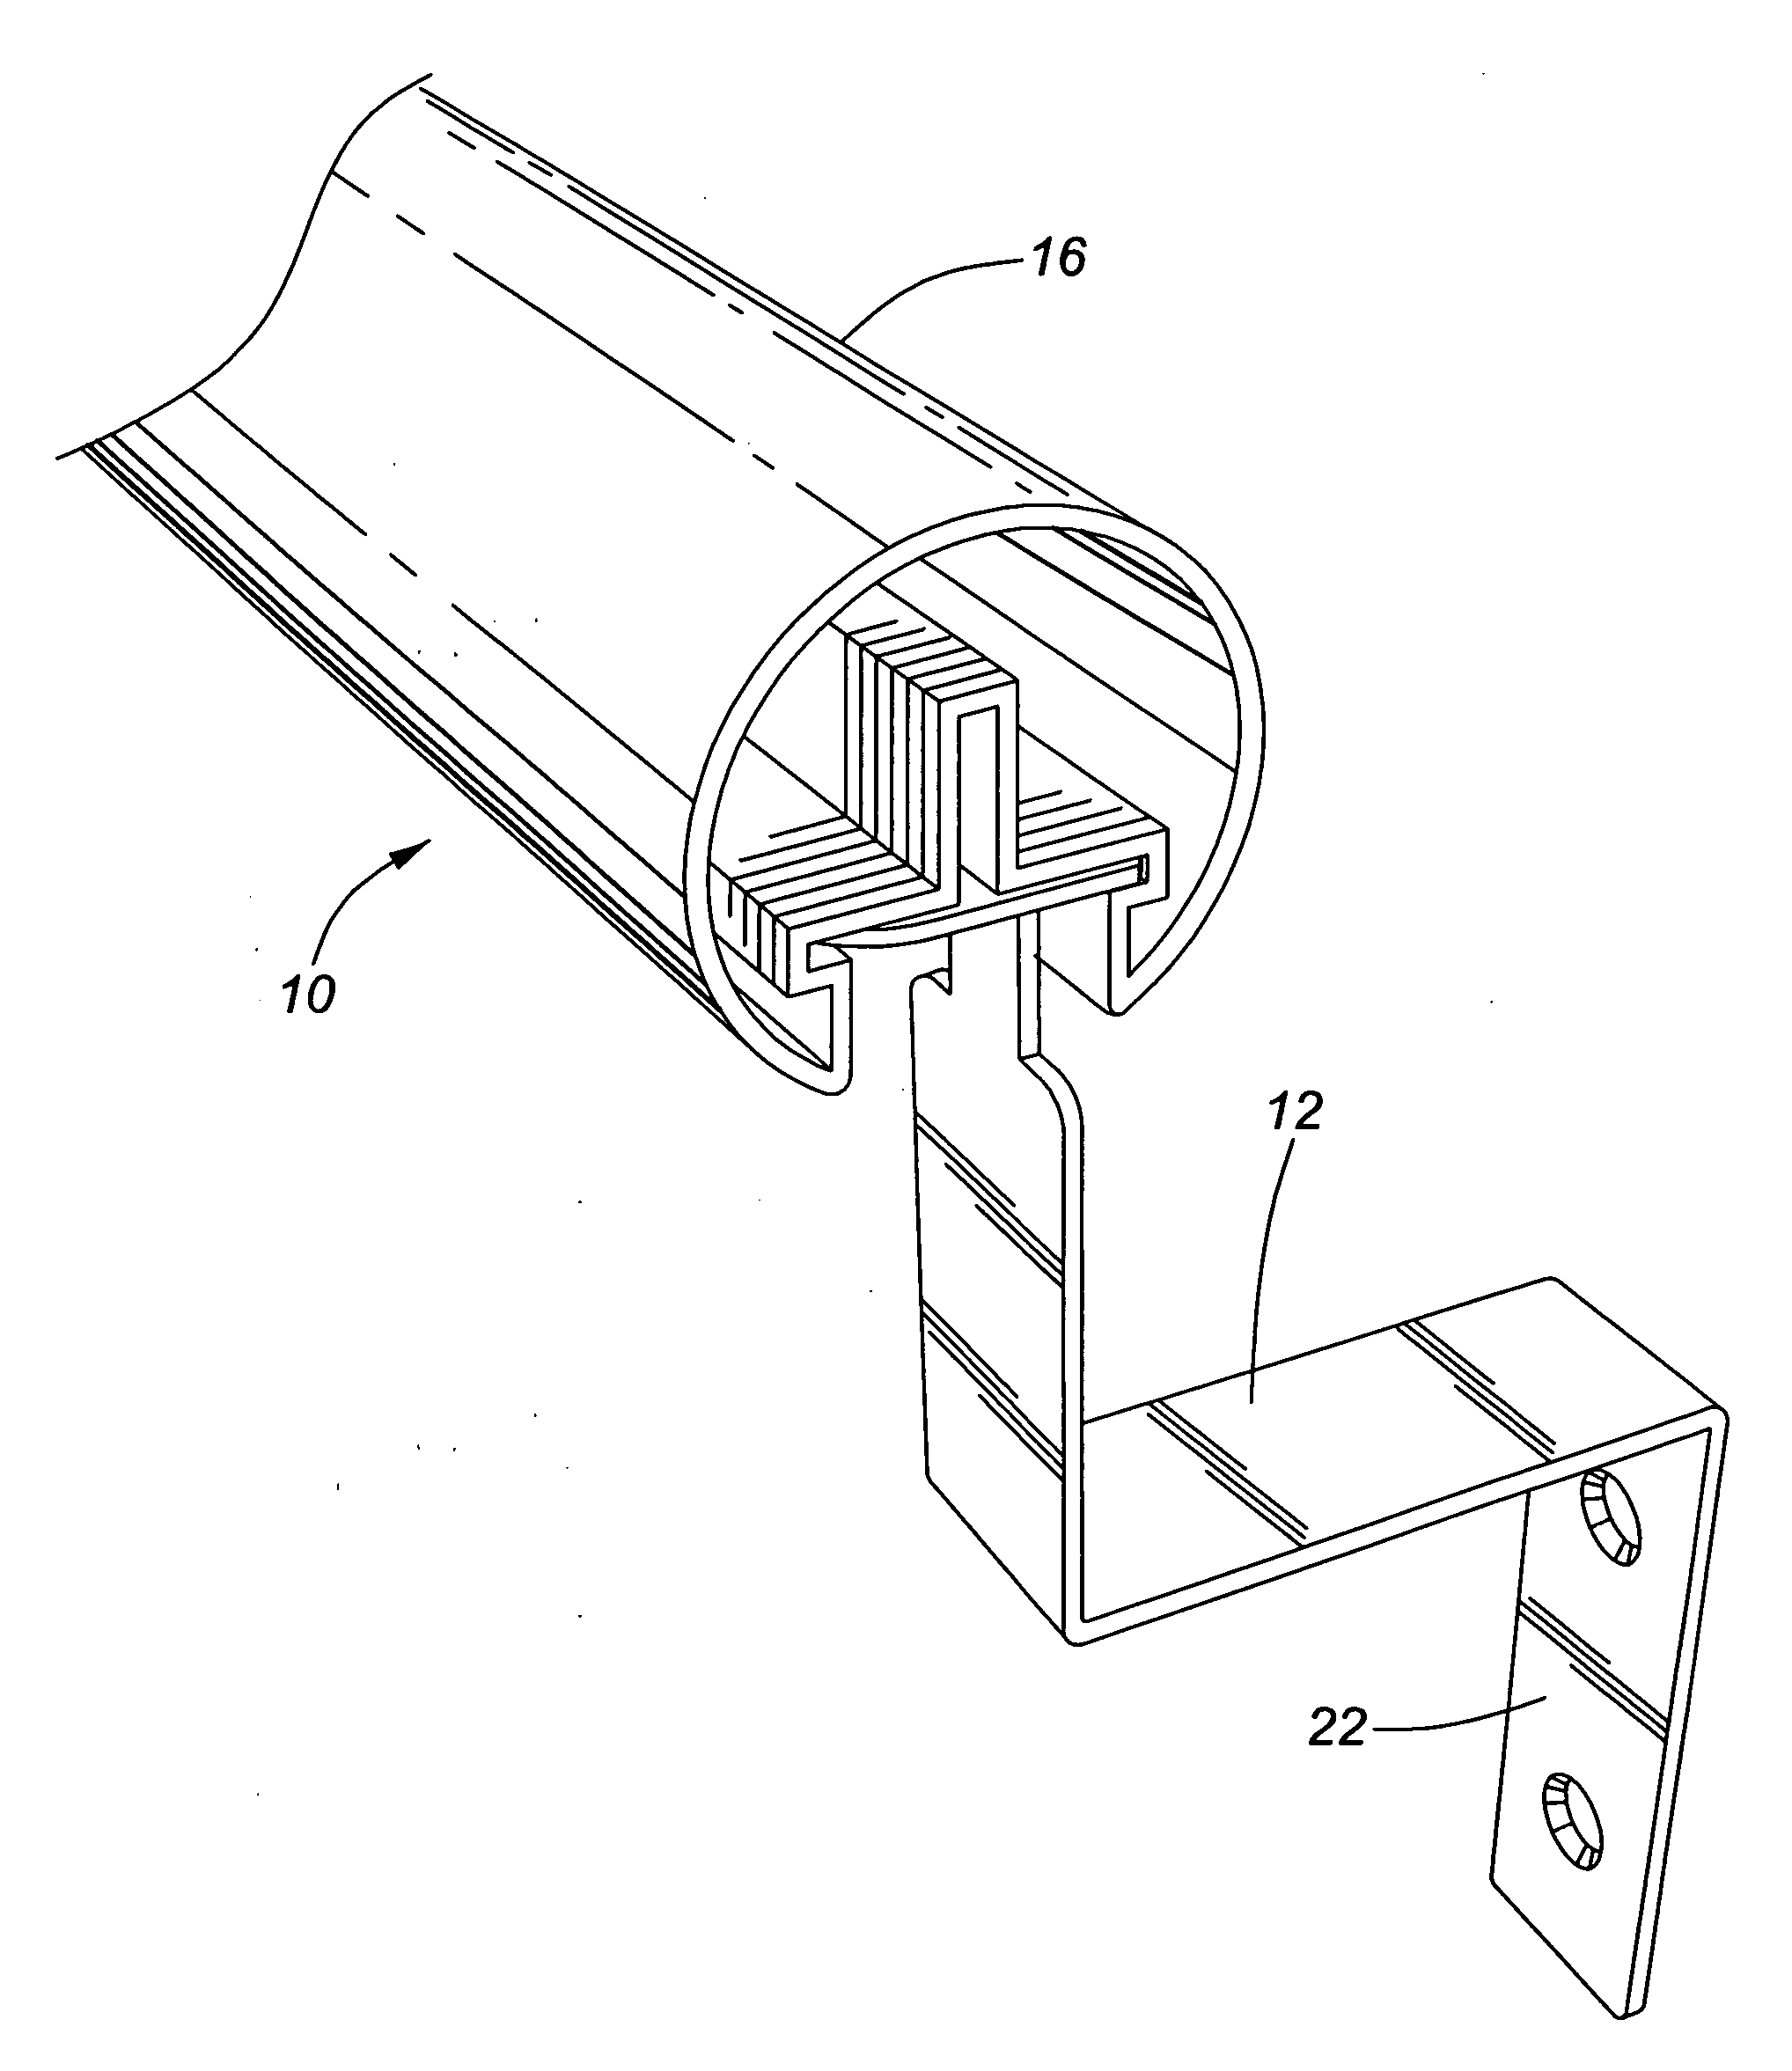 Handrail assembly and method